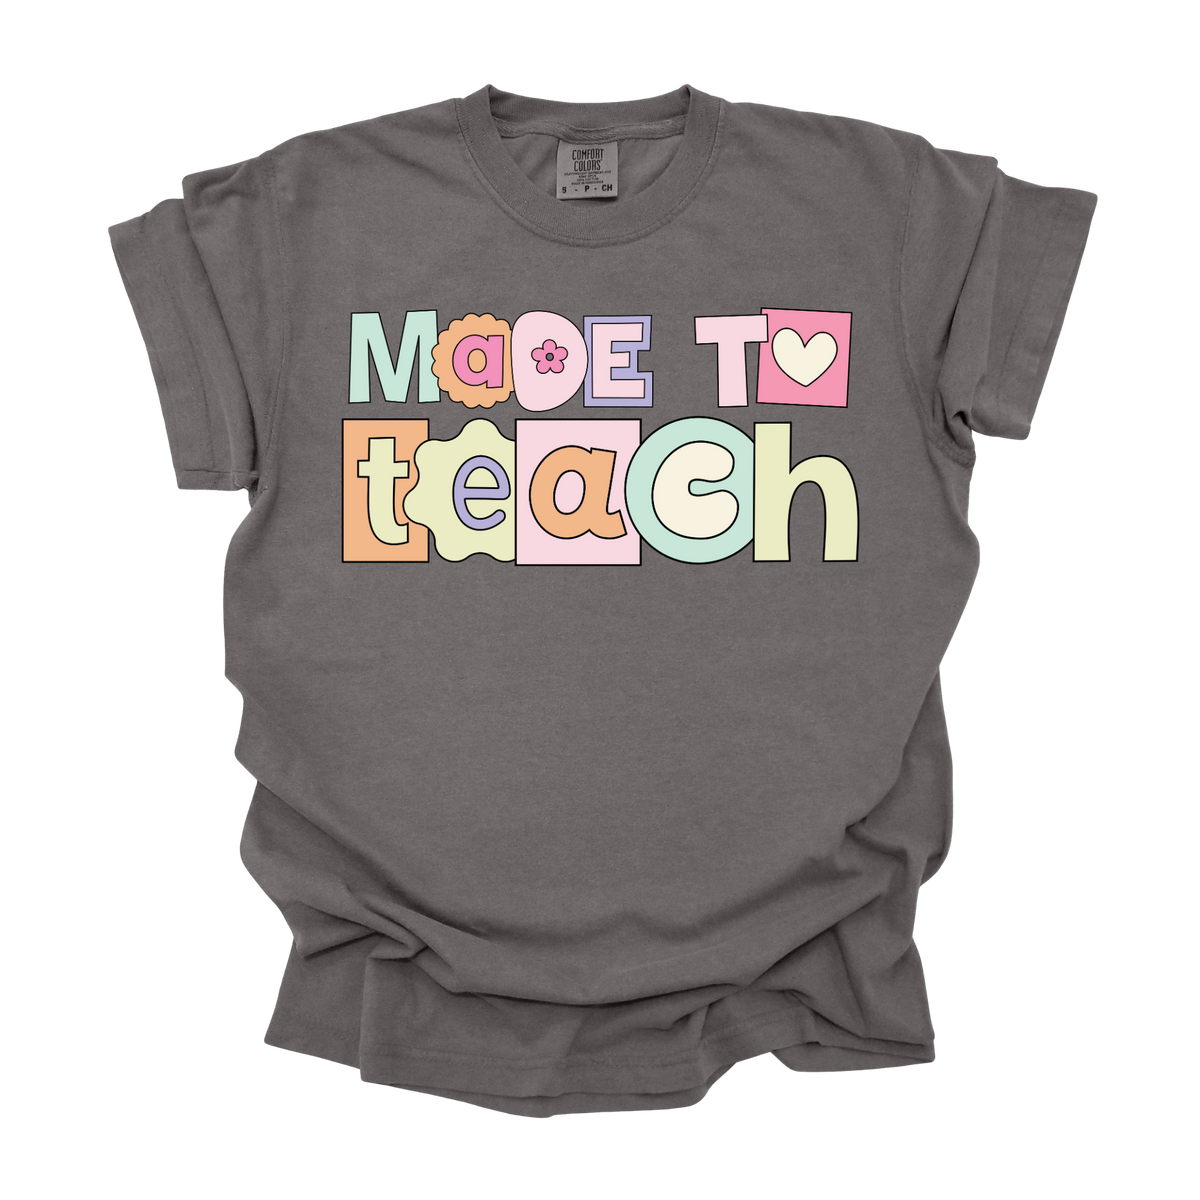 Made to Teach Collage Tee